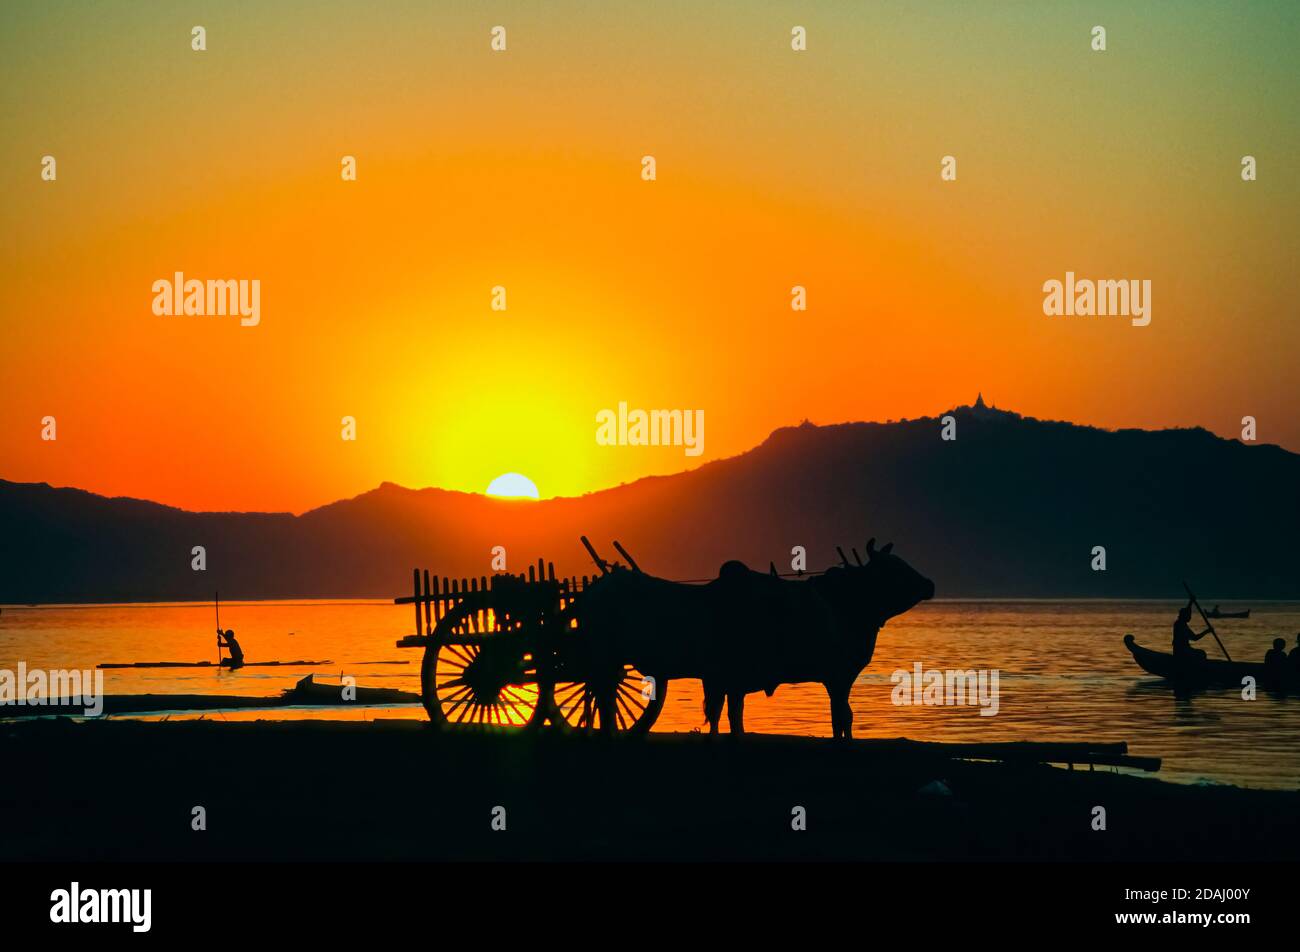 A traditional bullock cart silhouetted in Old Bagan on the banks of the Irrawaddy River, Myanmar (Burma) in the evening at sunset as teh sun goes down Stock Photo